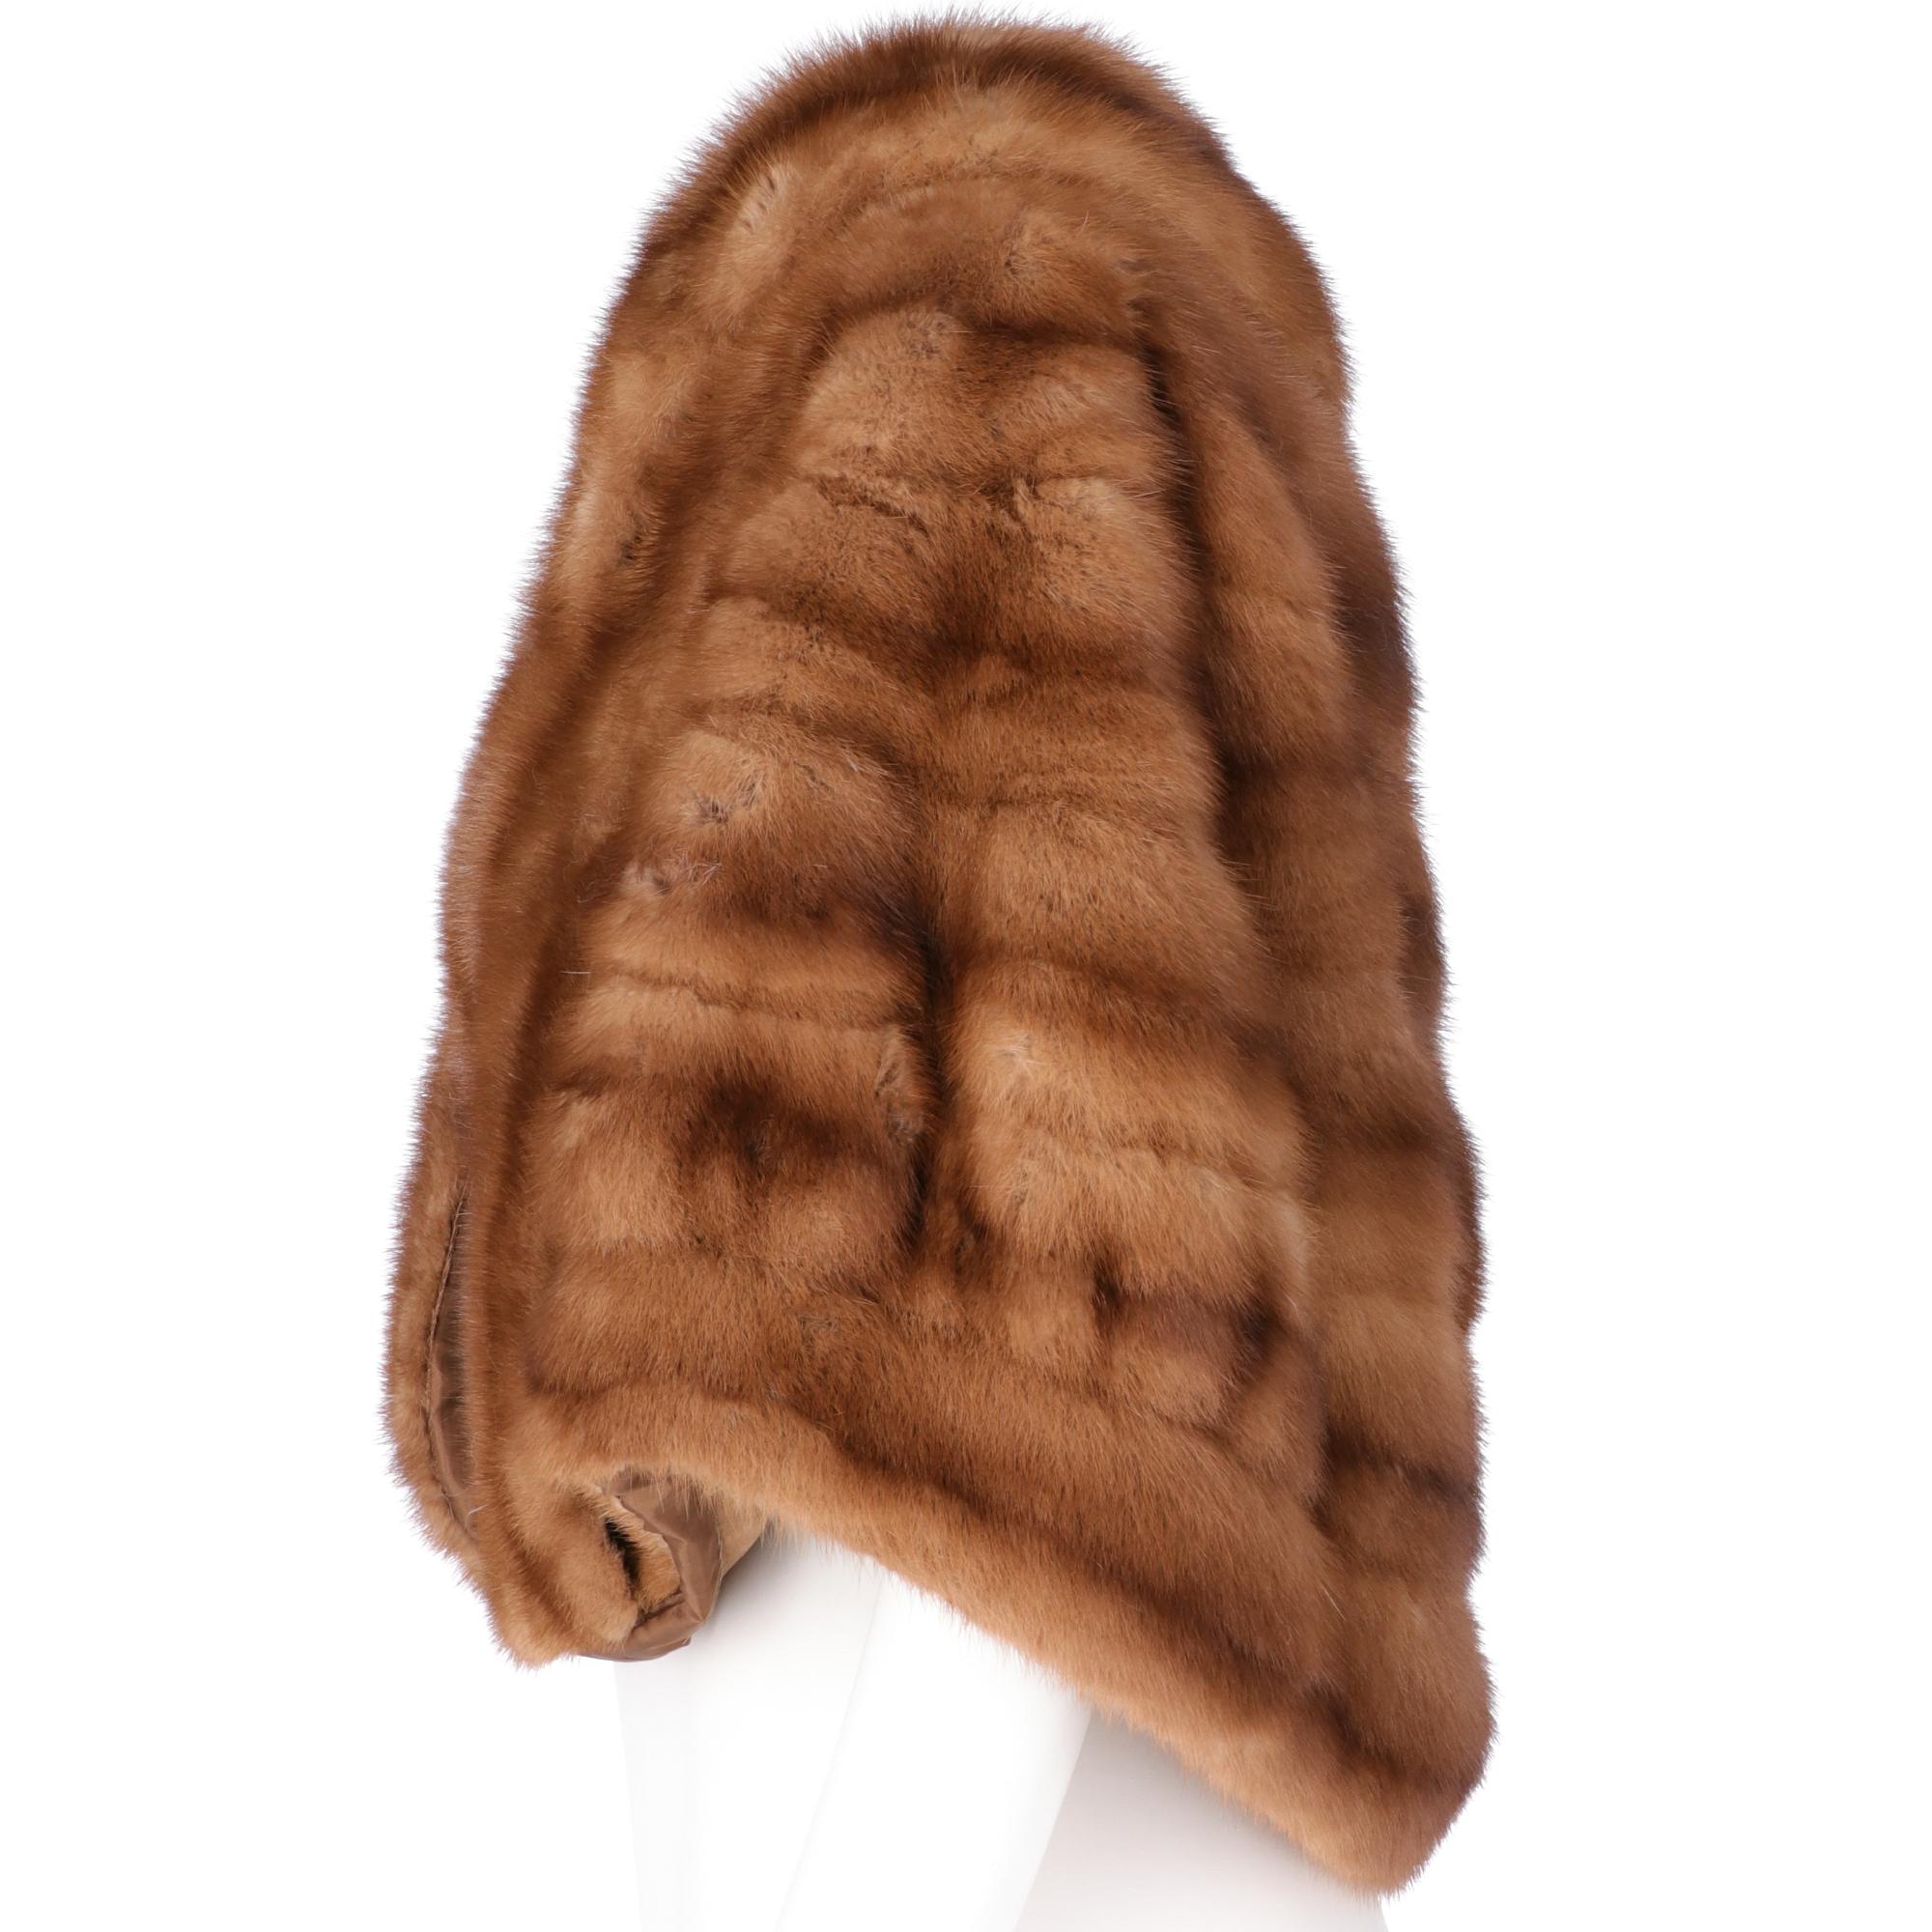 Soft brown mink cape, shawl collar, welt pockets, front closure with hook, half-length, round hem. Brown fabric lining with embroidered letters.

Please note this item cannot be shipped outside the European Union.

Years: 50s

Made in England

Size: